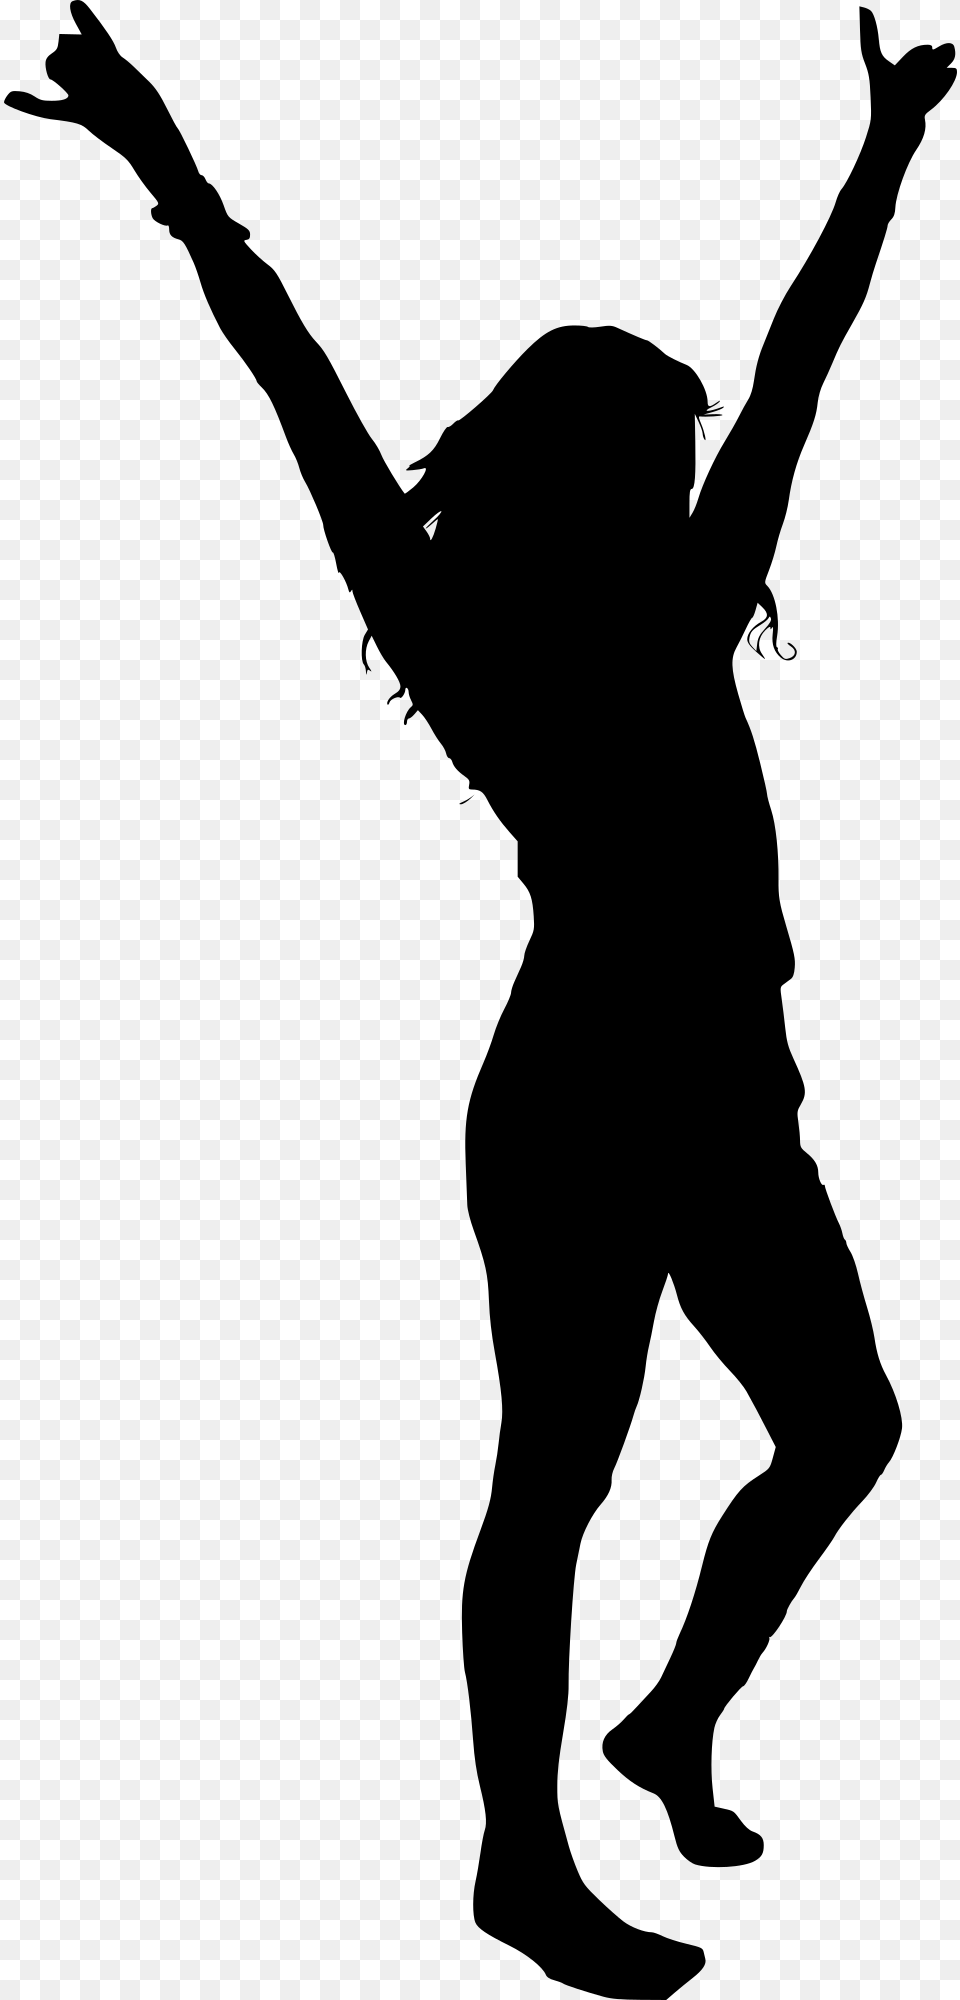 Woman Hands Up Girl With Hands Up Silhouette, Gray Free Png